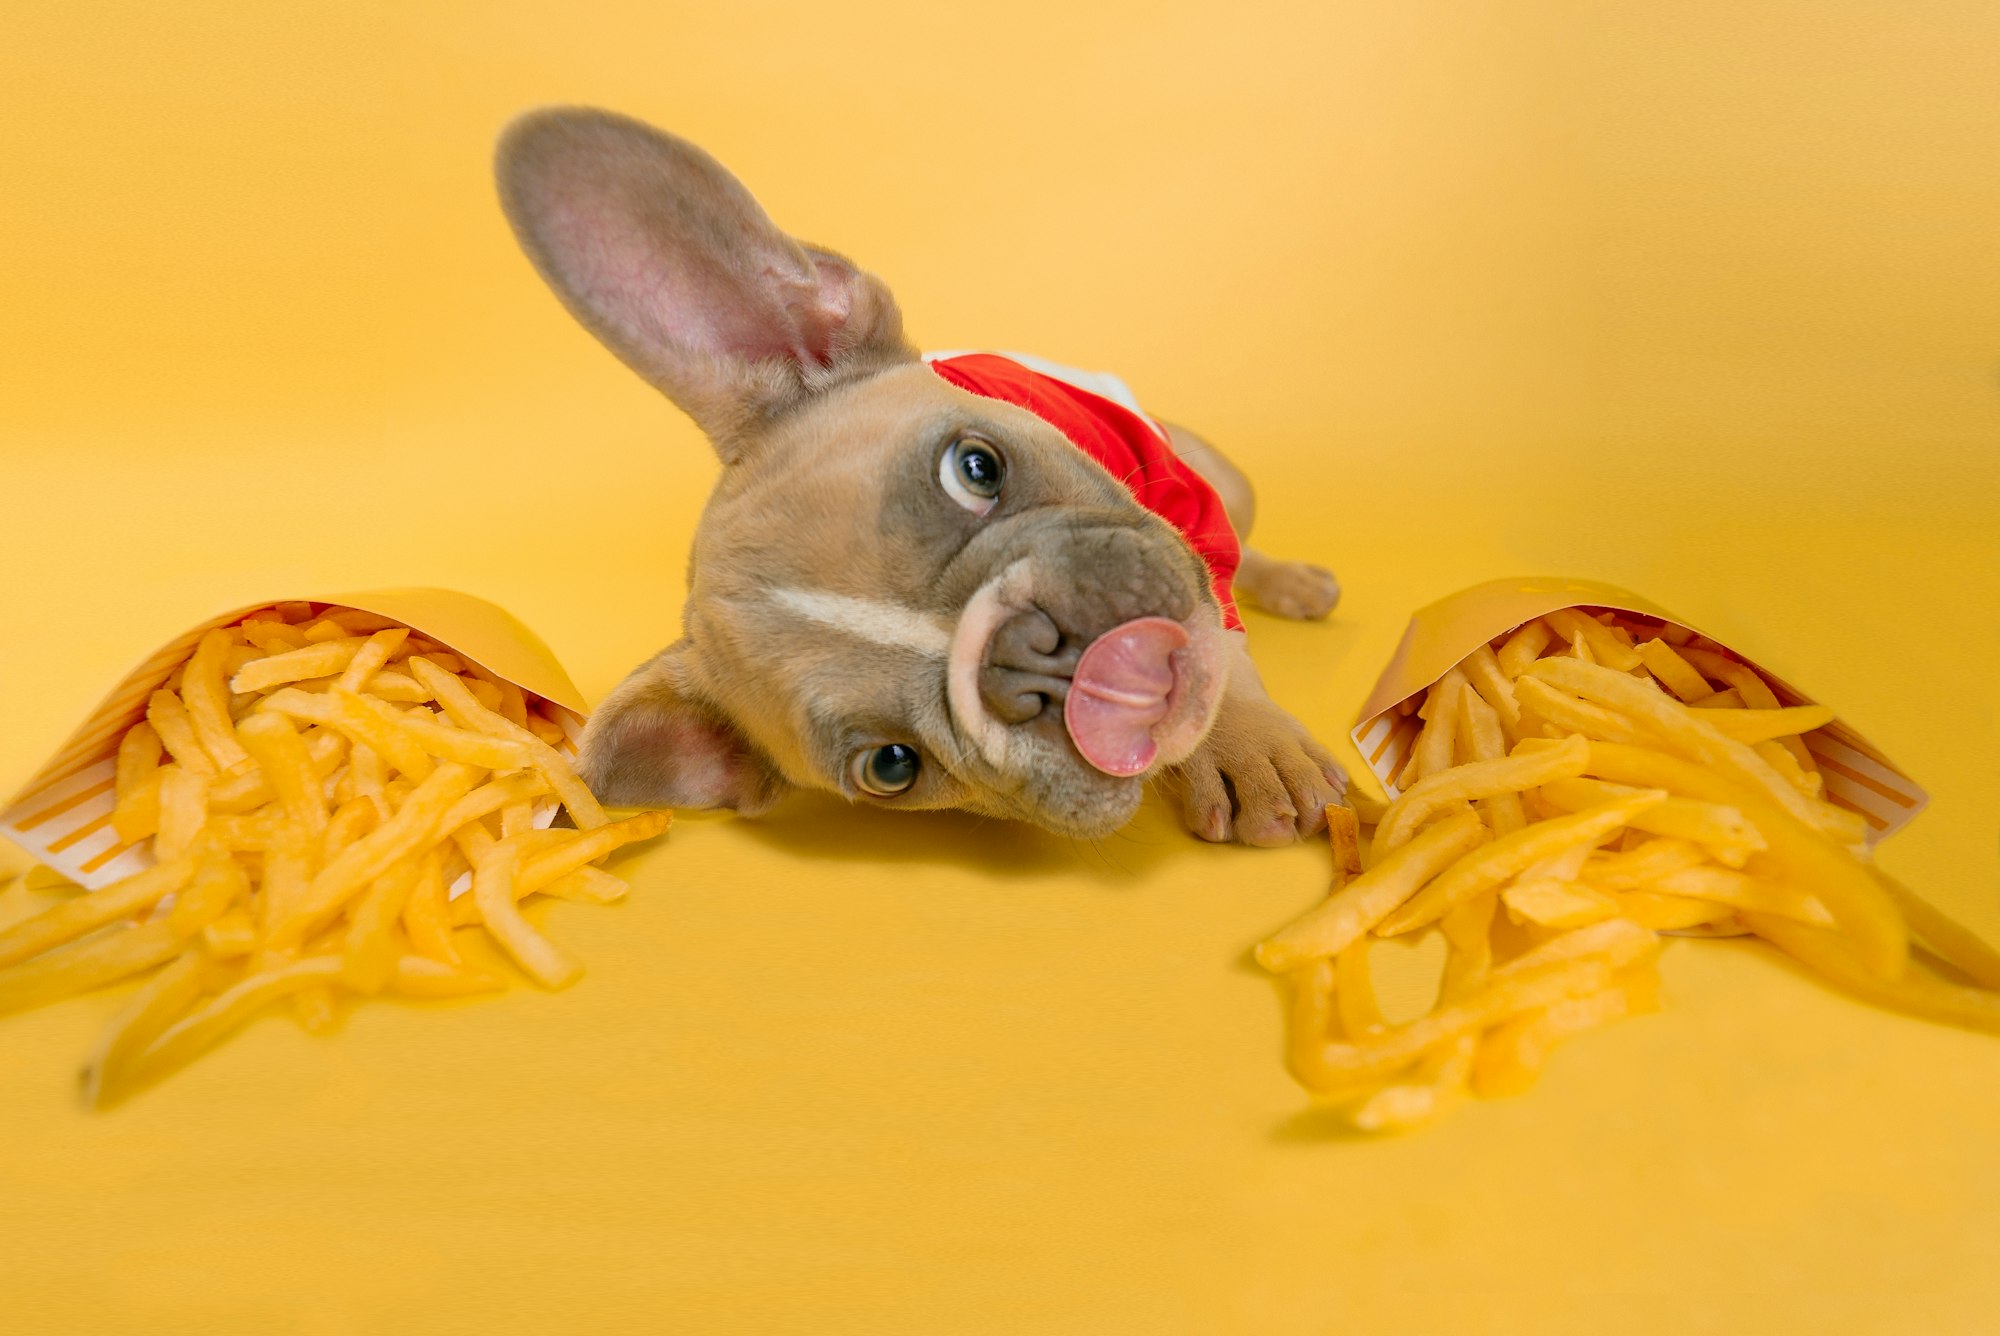 can dogs eat french fries